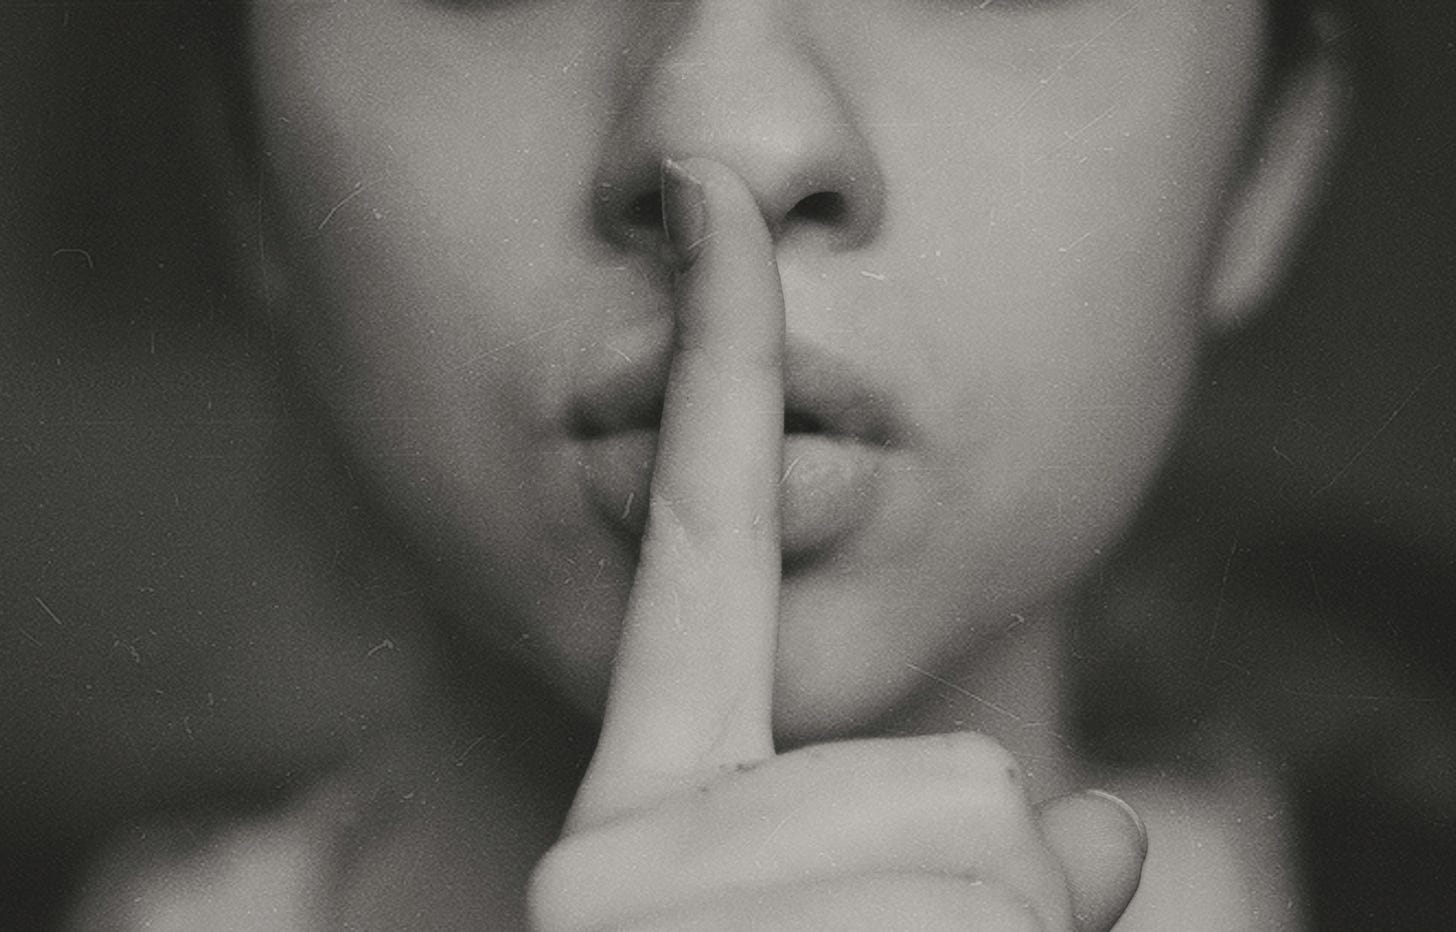 woman with finger to her lips